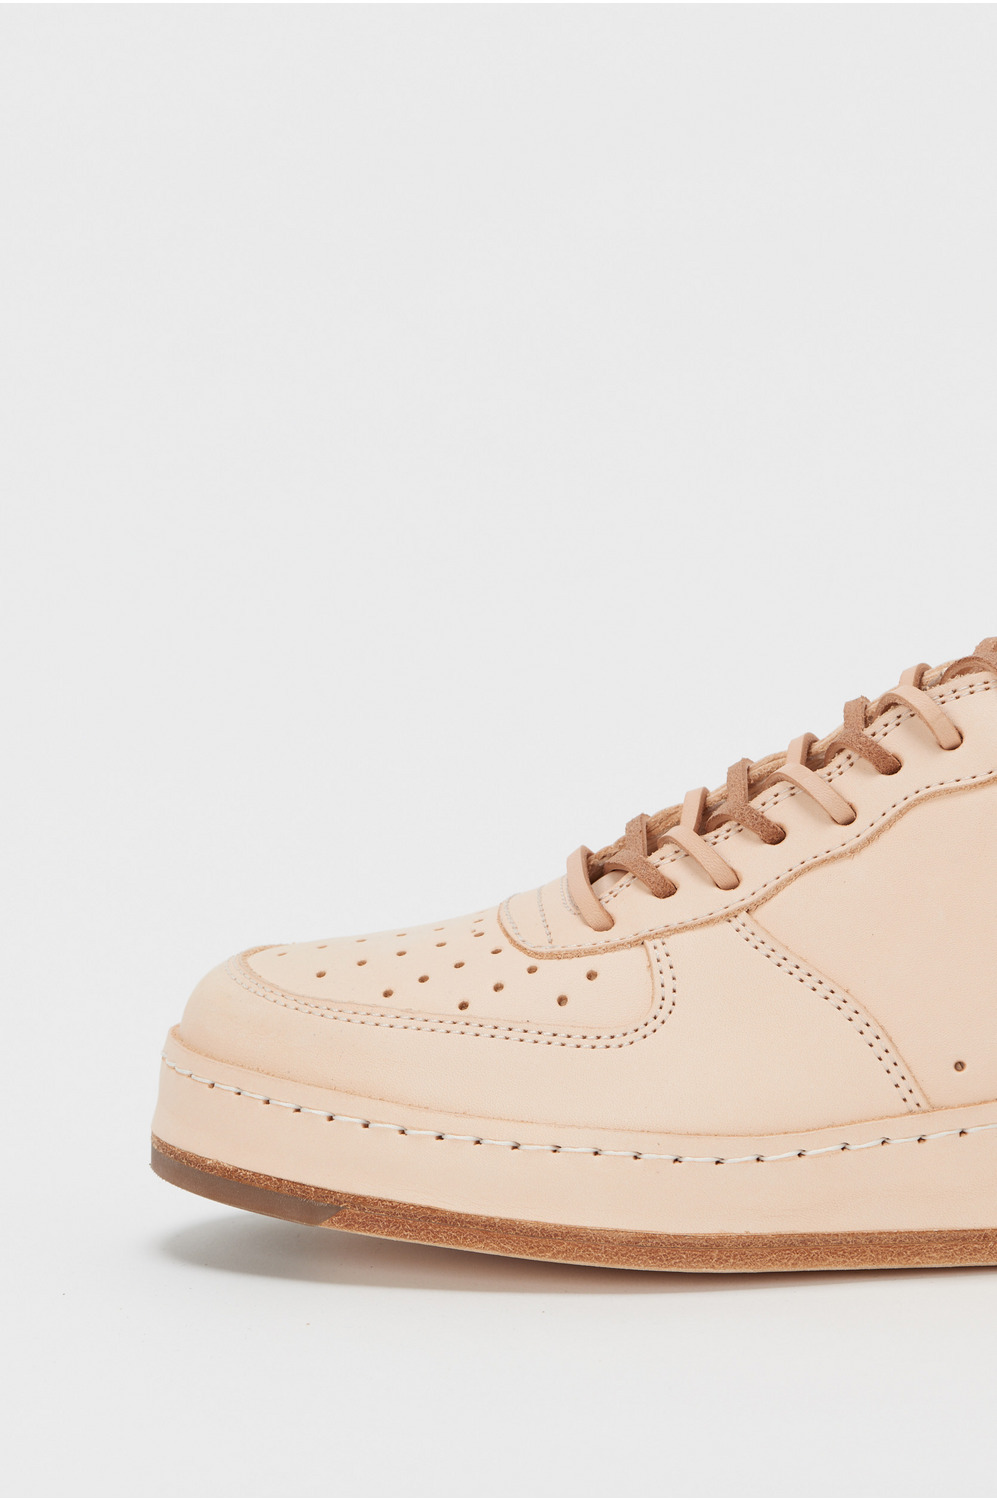 manual industrial products 22｜スキマ Hender Scheme Official Online Shop